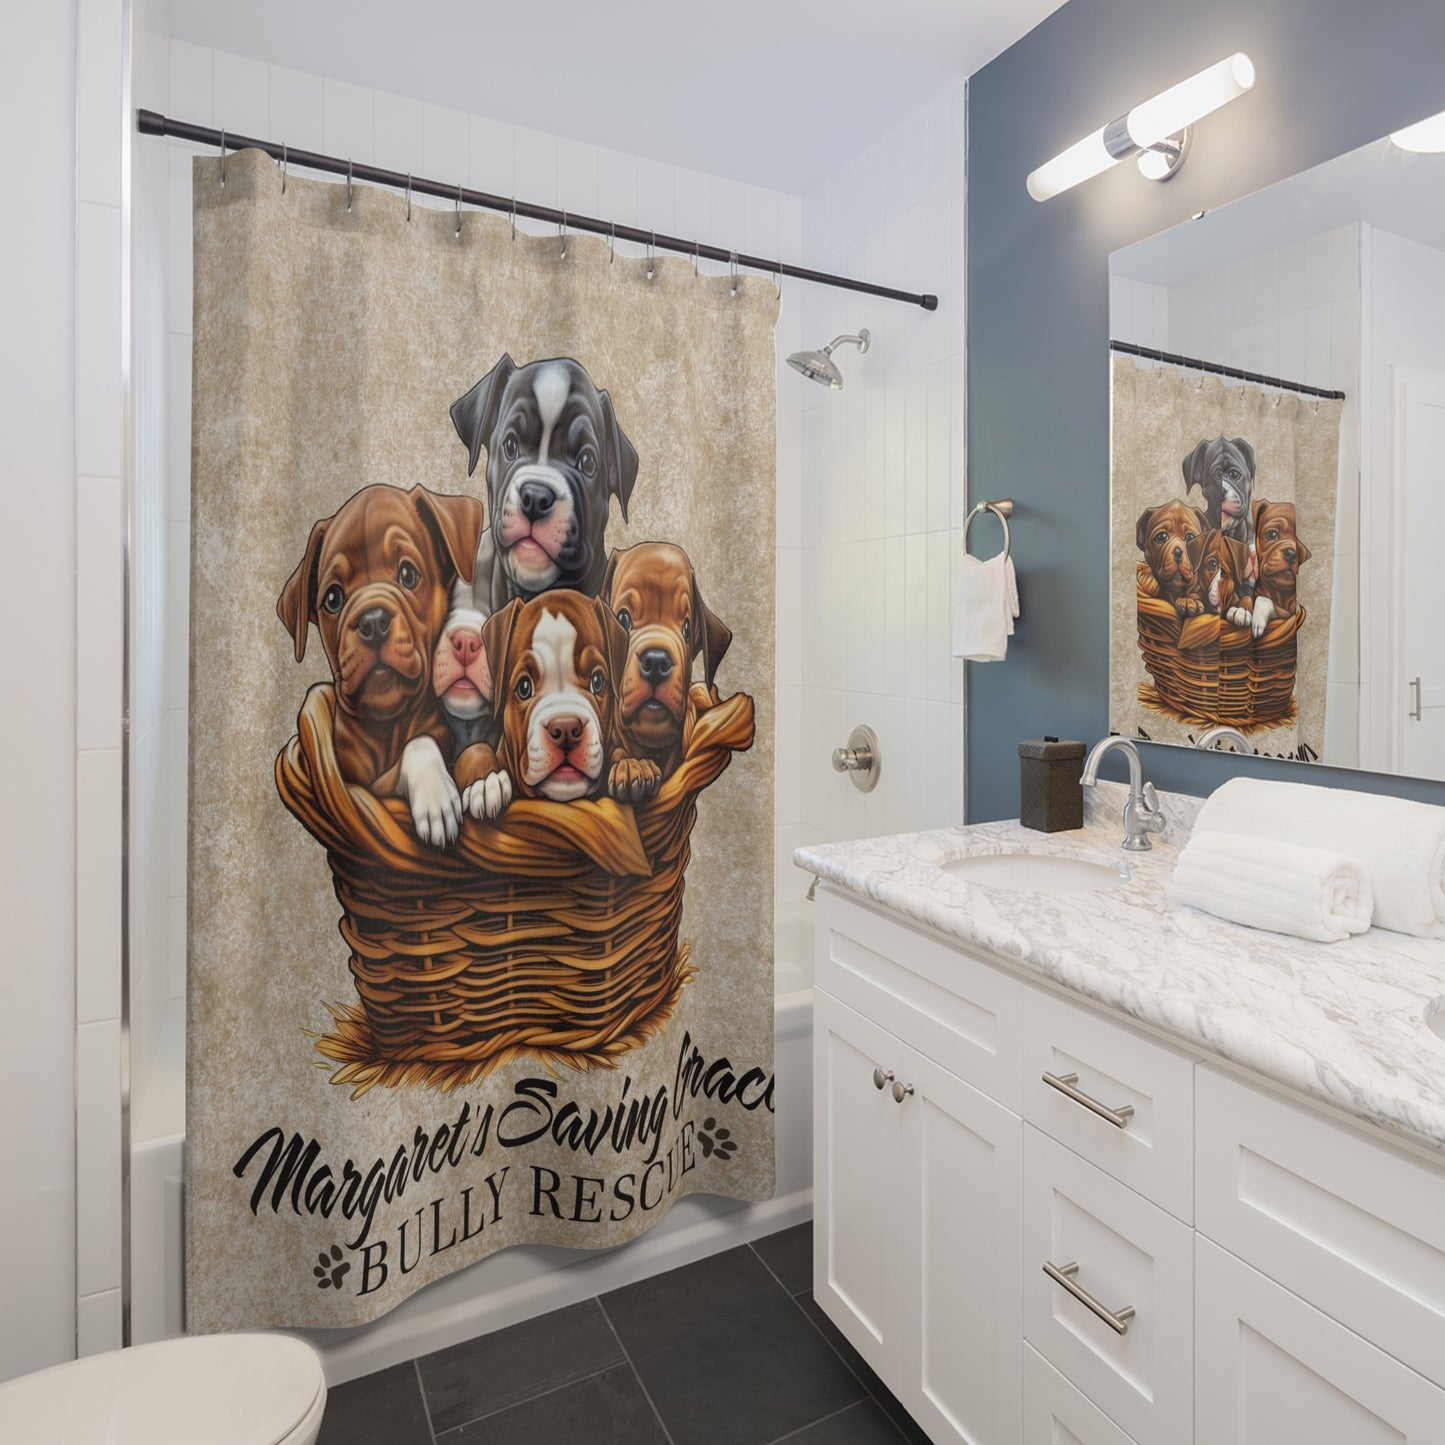 MSGBR Bully Rescue Pitbull Puppies Graphic Art #1 Bathroom Shower Curtain